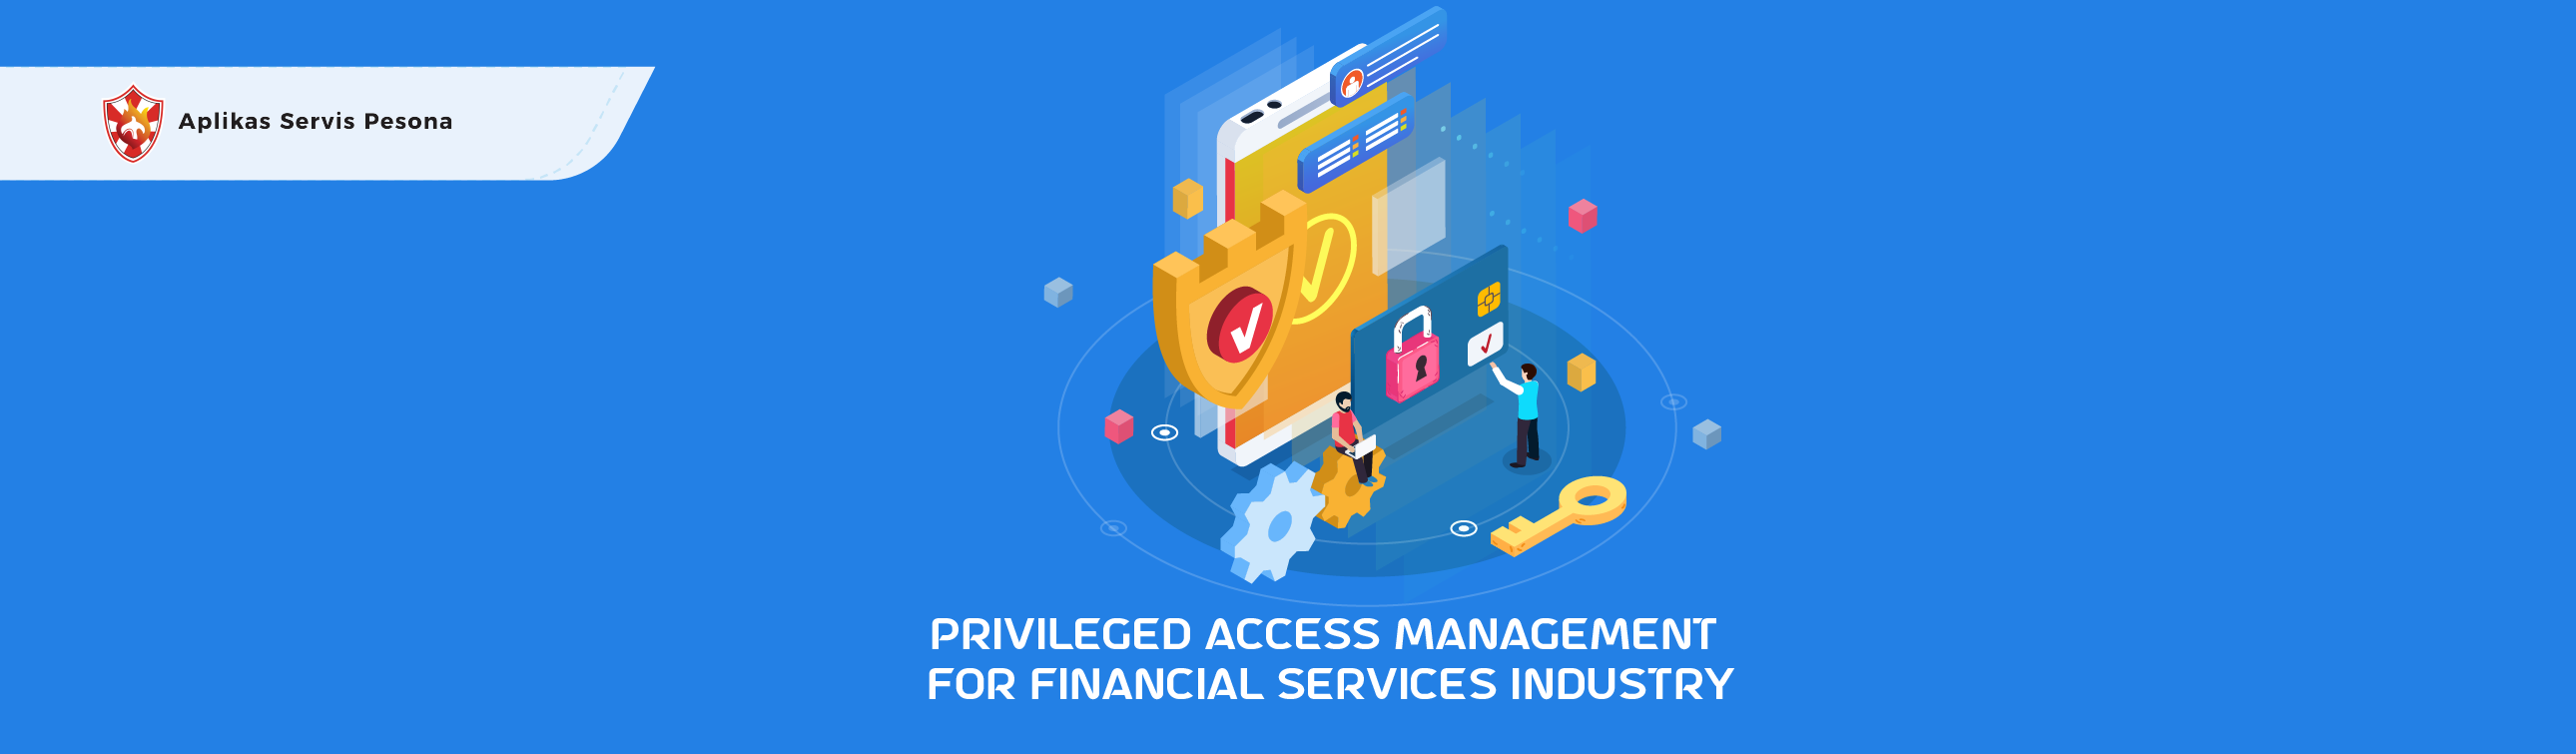 Should the Financial Services Industry Implement Privileged Access Management Solution?